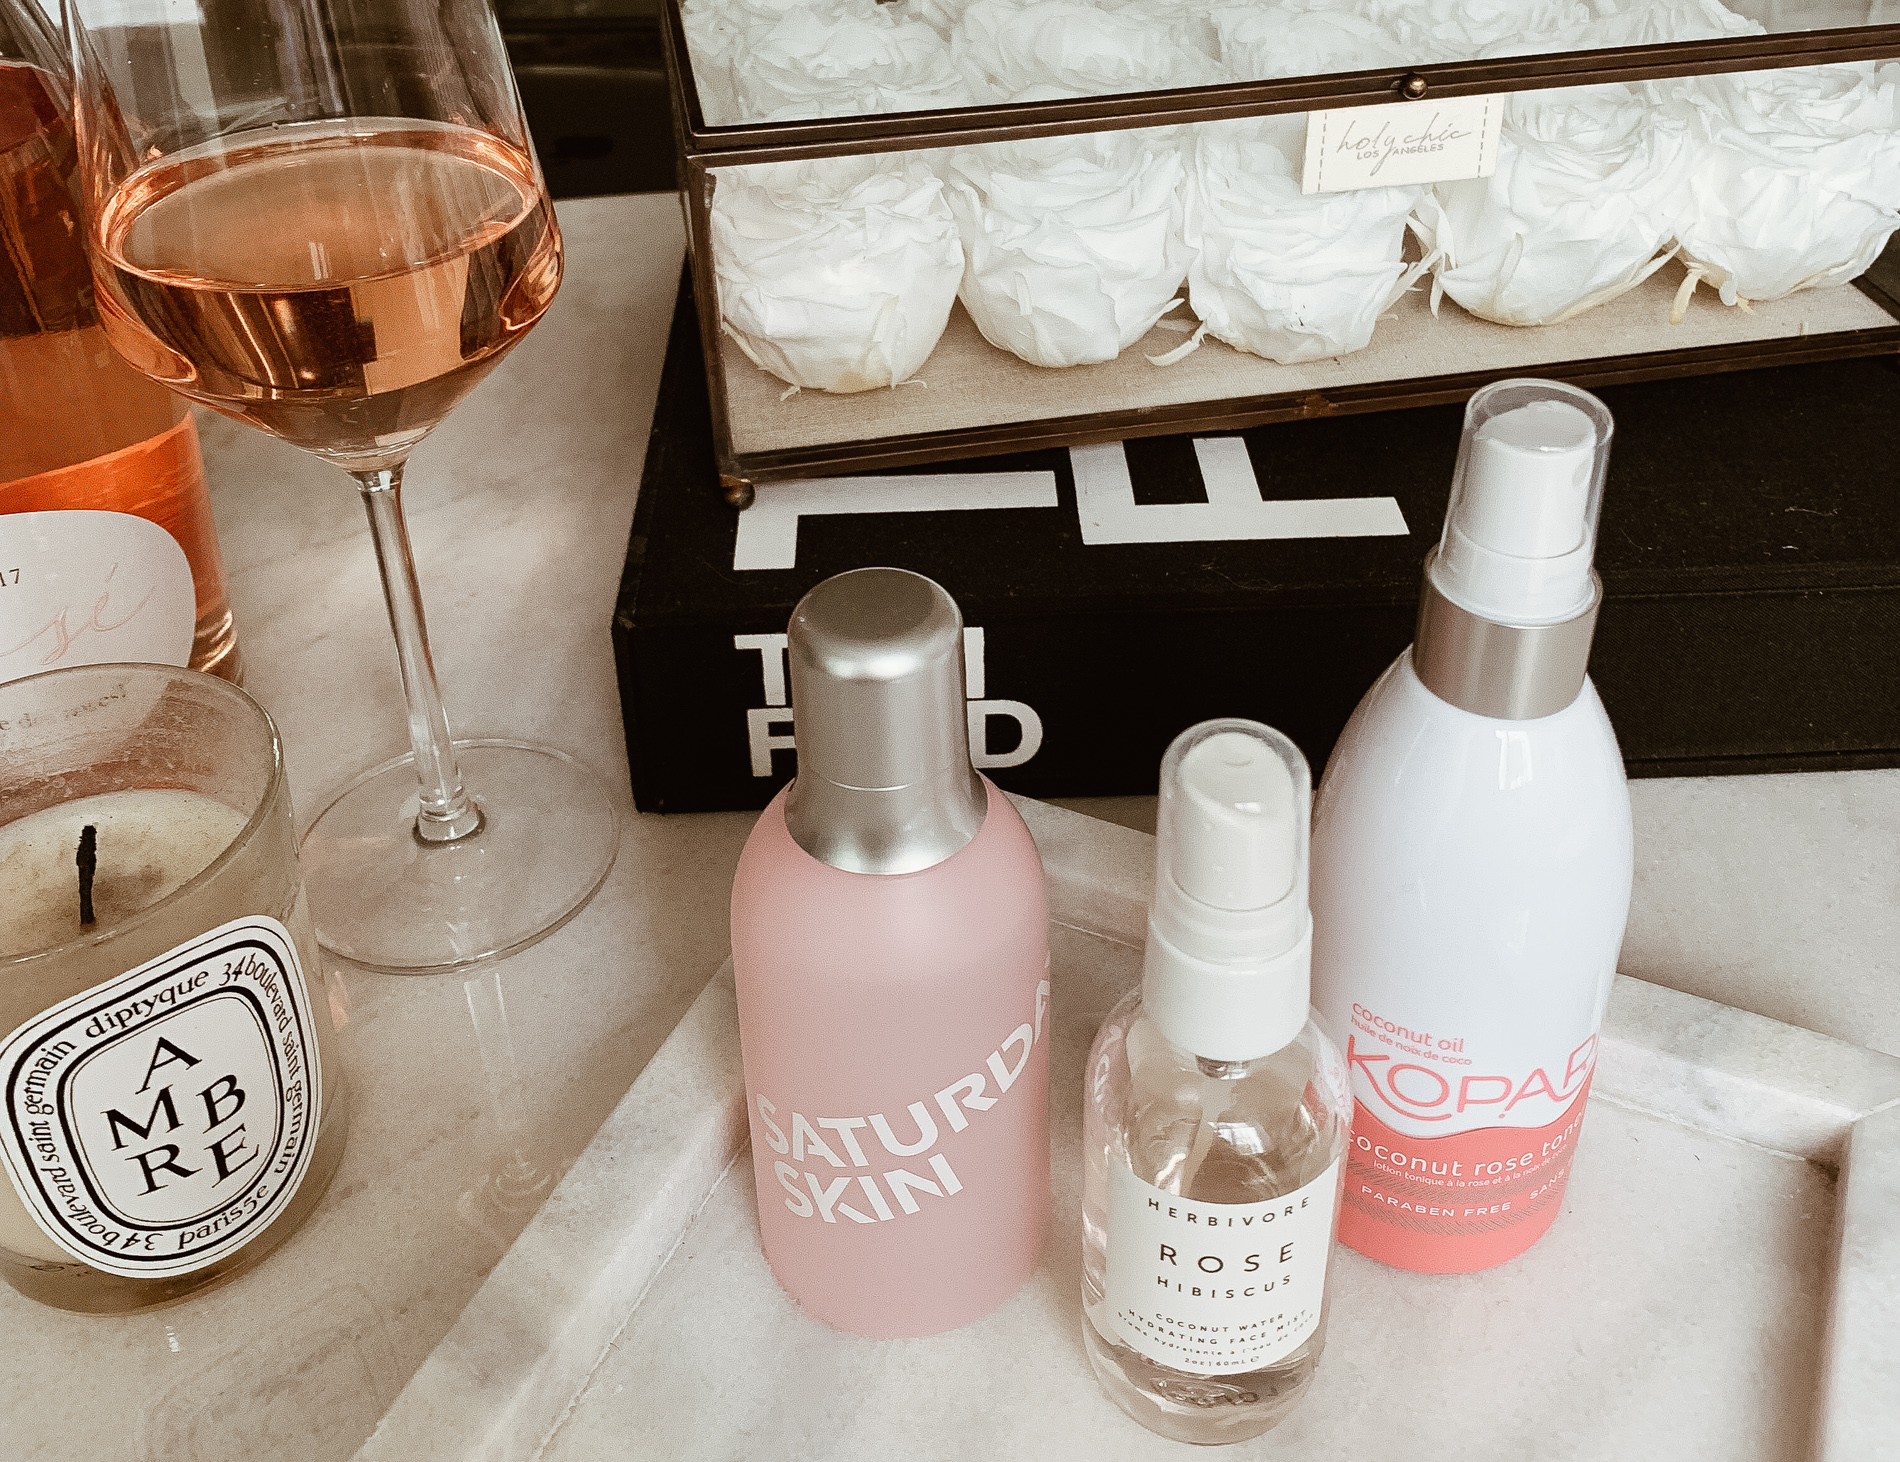 3 Face Mists I'm Loving Right Now | Coconut Rose Toner by Kopari, Rose Hibiscus Face Mist by Herbivore, Saturday Skin Face Mist | Skincare | Blondie in the City by Hayley Larue